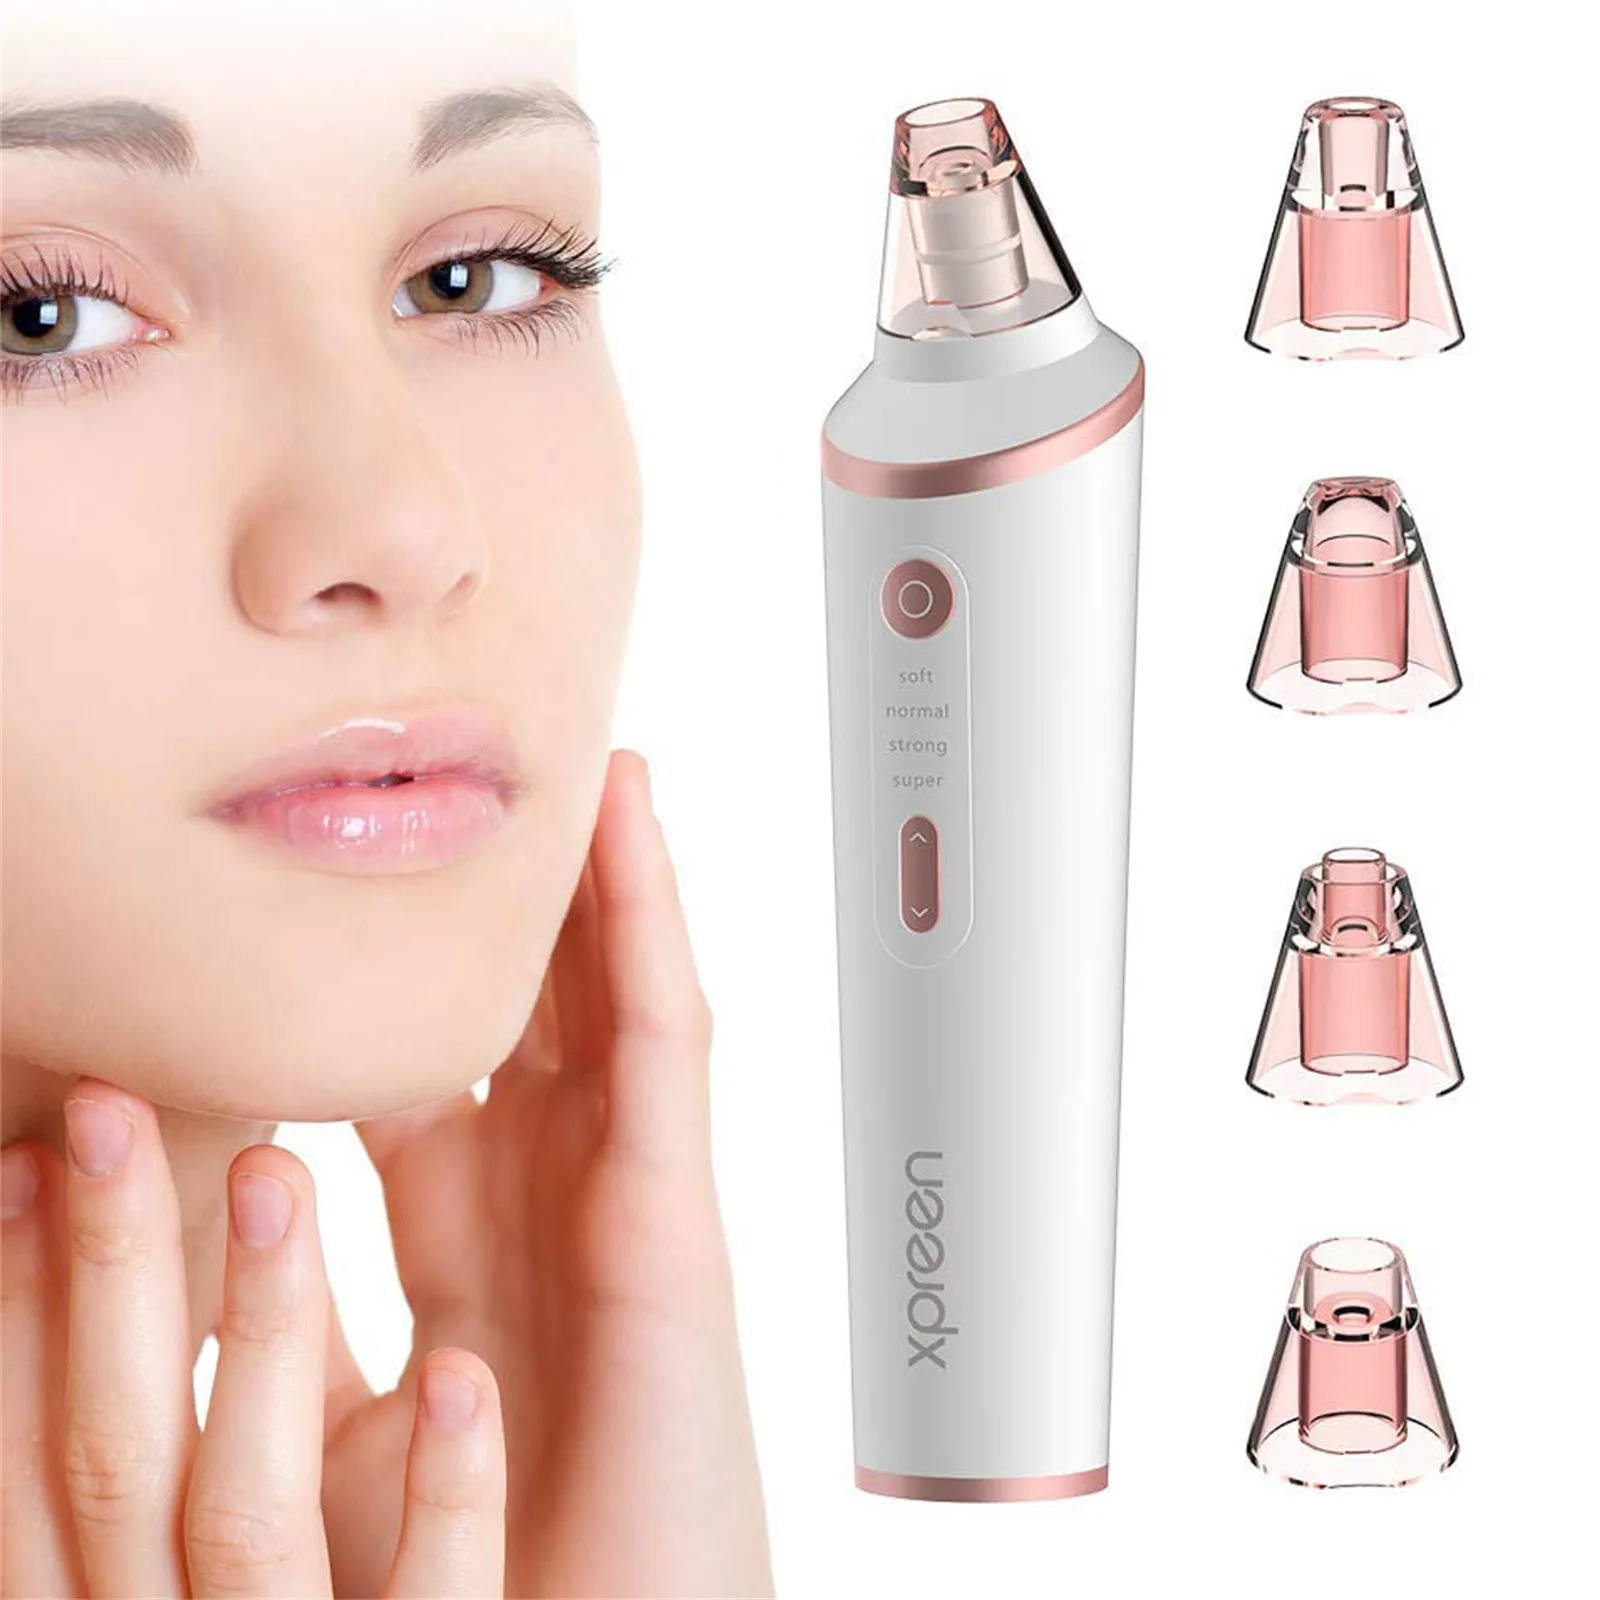 

New Electric Facial Blackhead Remover Black Spots Removal Vacuum Pore Cleaner Acne Cleanser Face Nose Deep Cleaning Tools